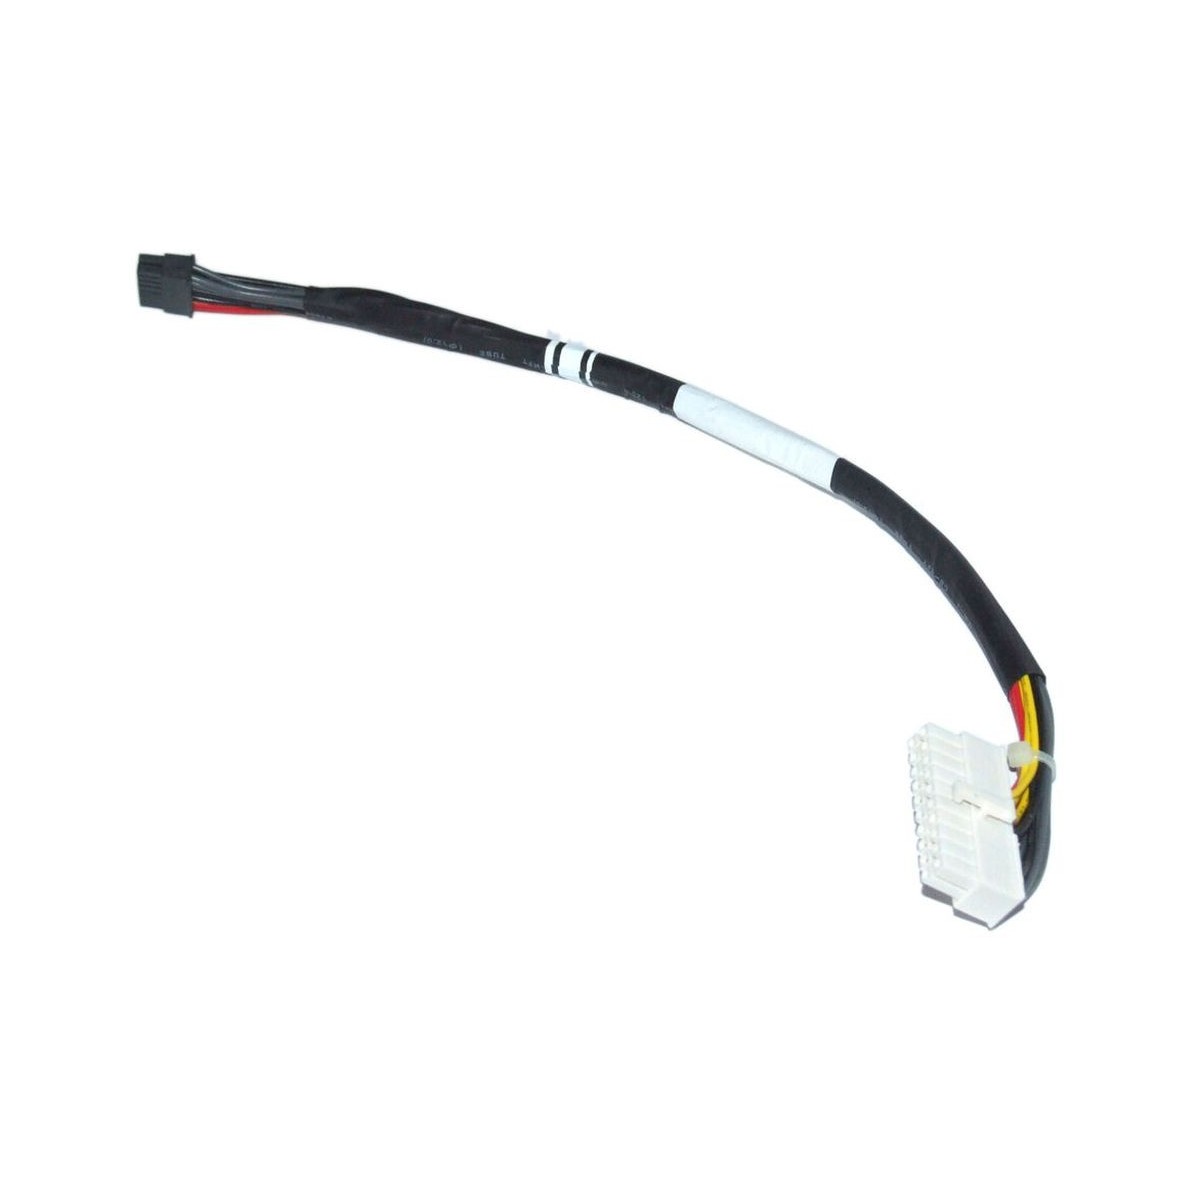 POWER KABEL DELL POWEREDGE 1950 WY359 0WY359